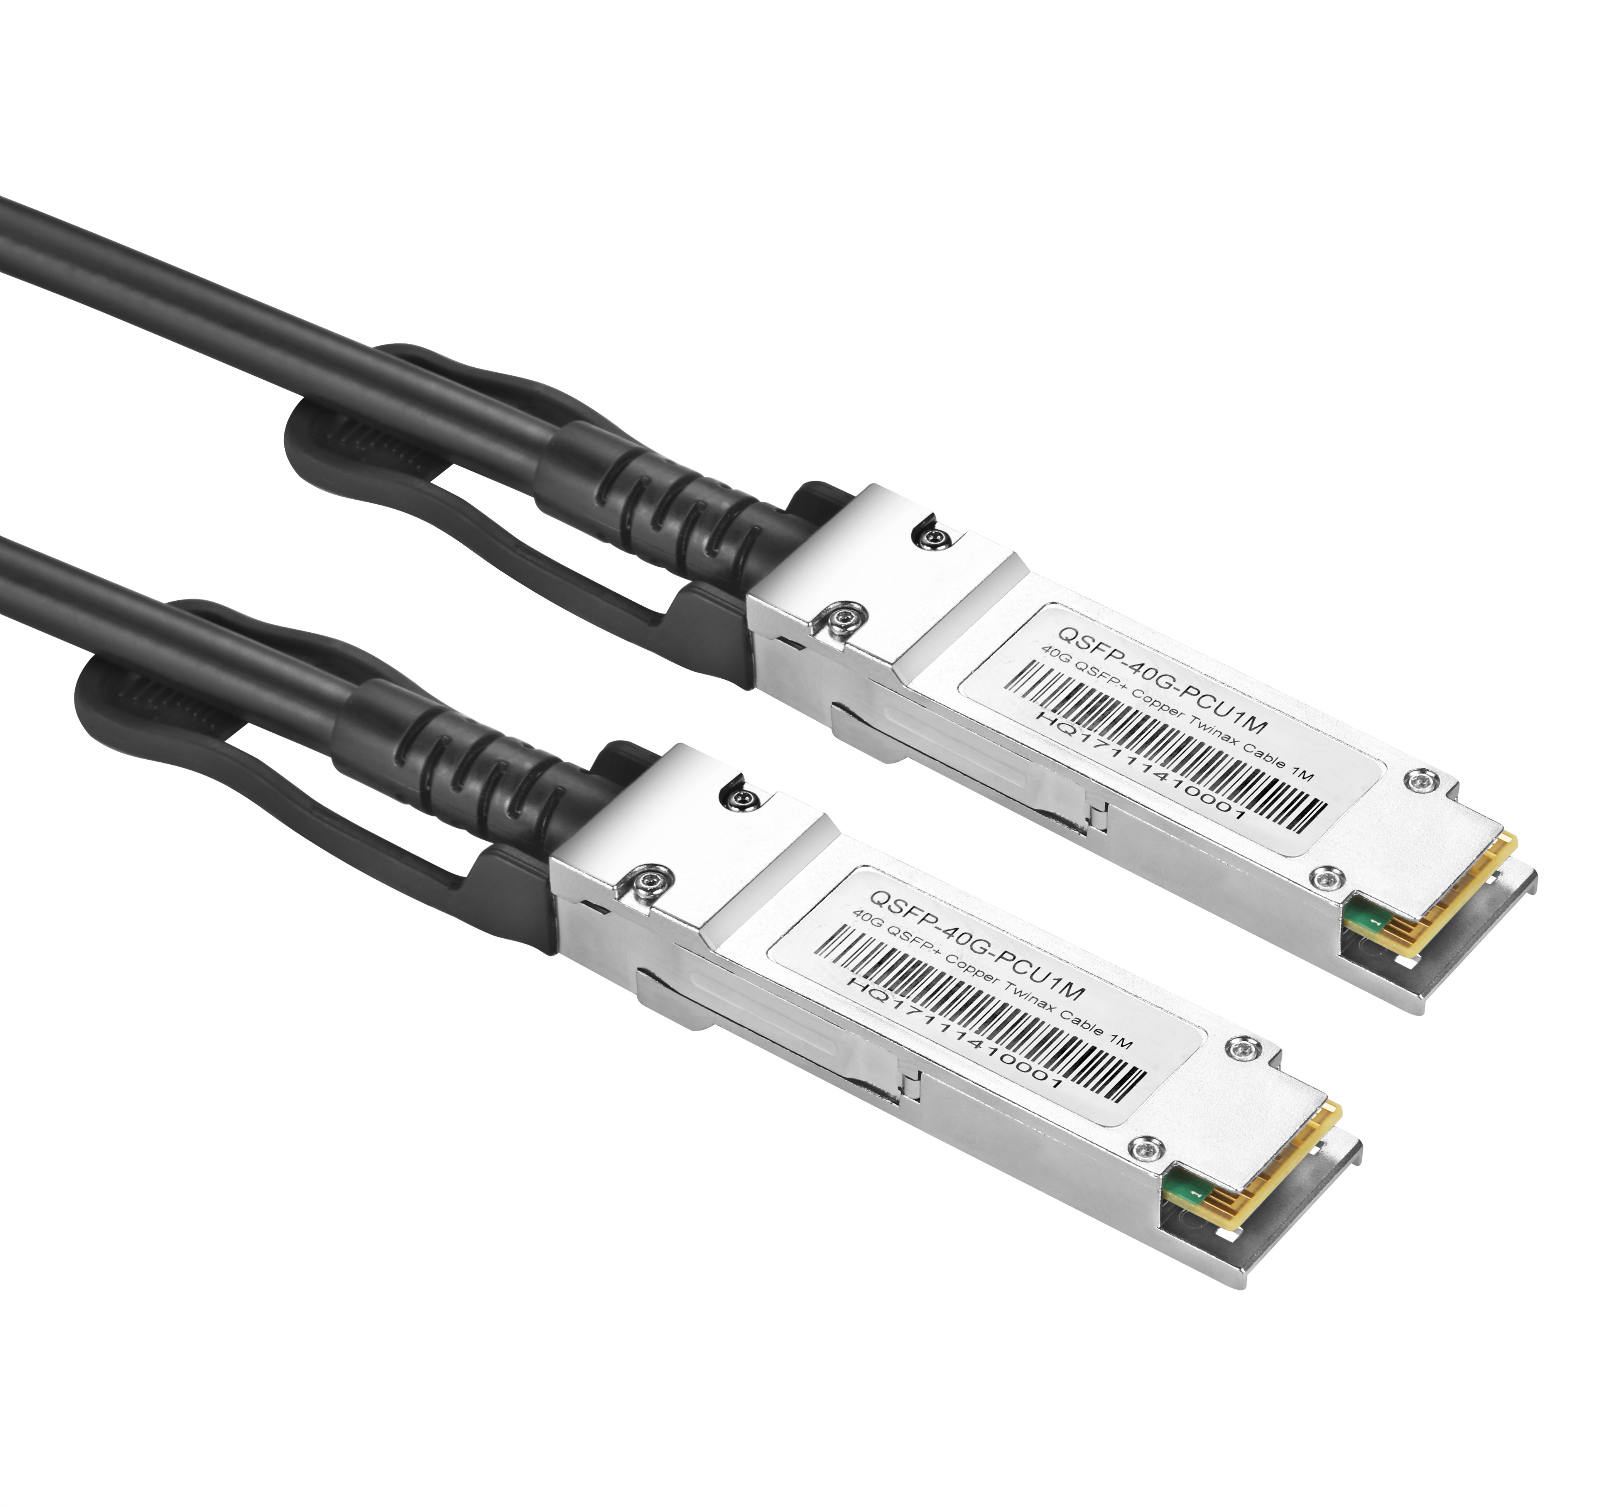 Price promotion of10G SFP DAC 2M CISCO is coming